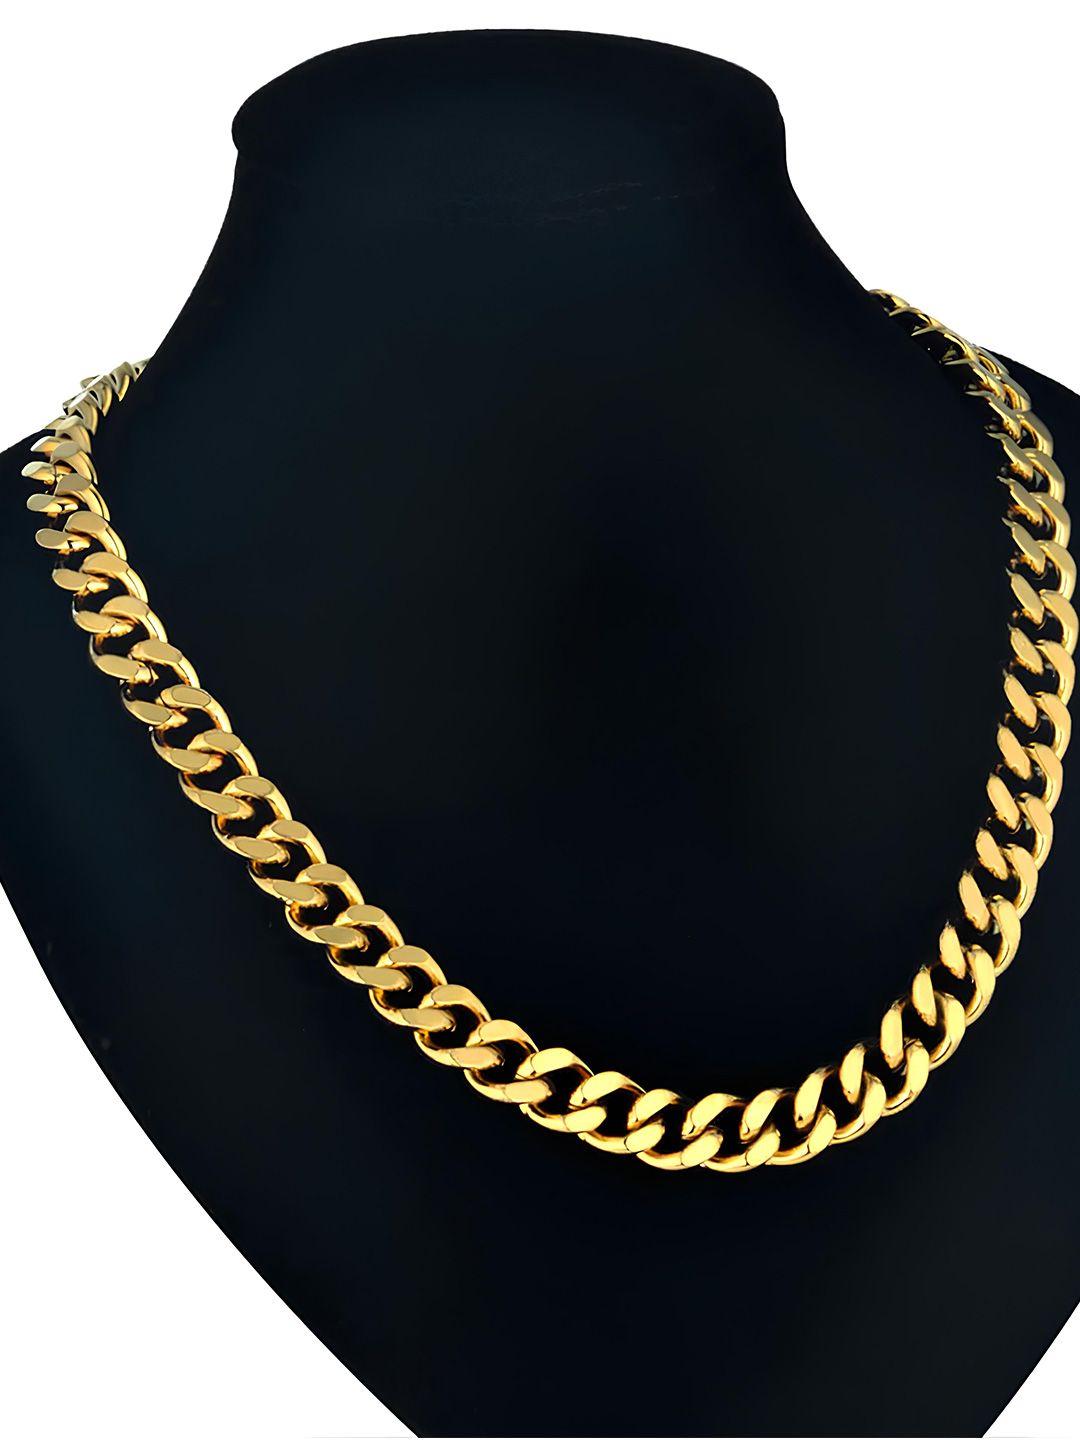 karishma kreations unisex stainless steel gold-plated chain